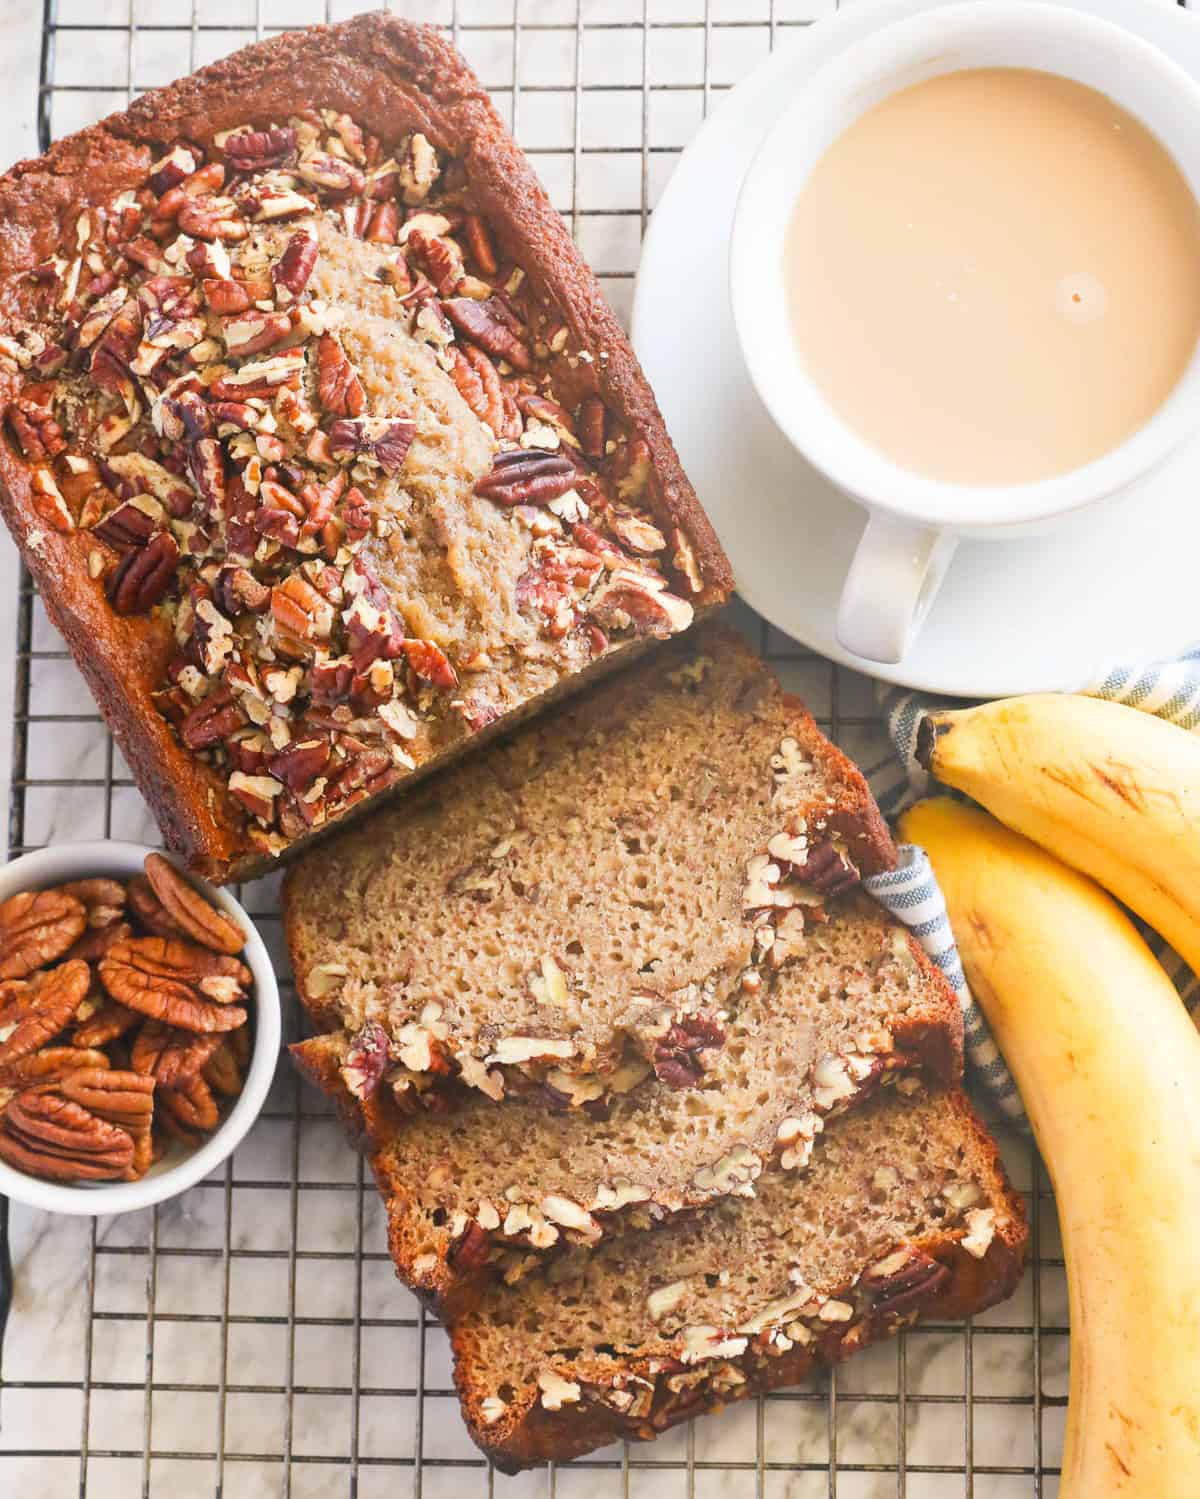 Freshly baked banana nut bread sliced and ready to serve with a cup of coffee